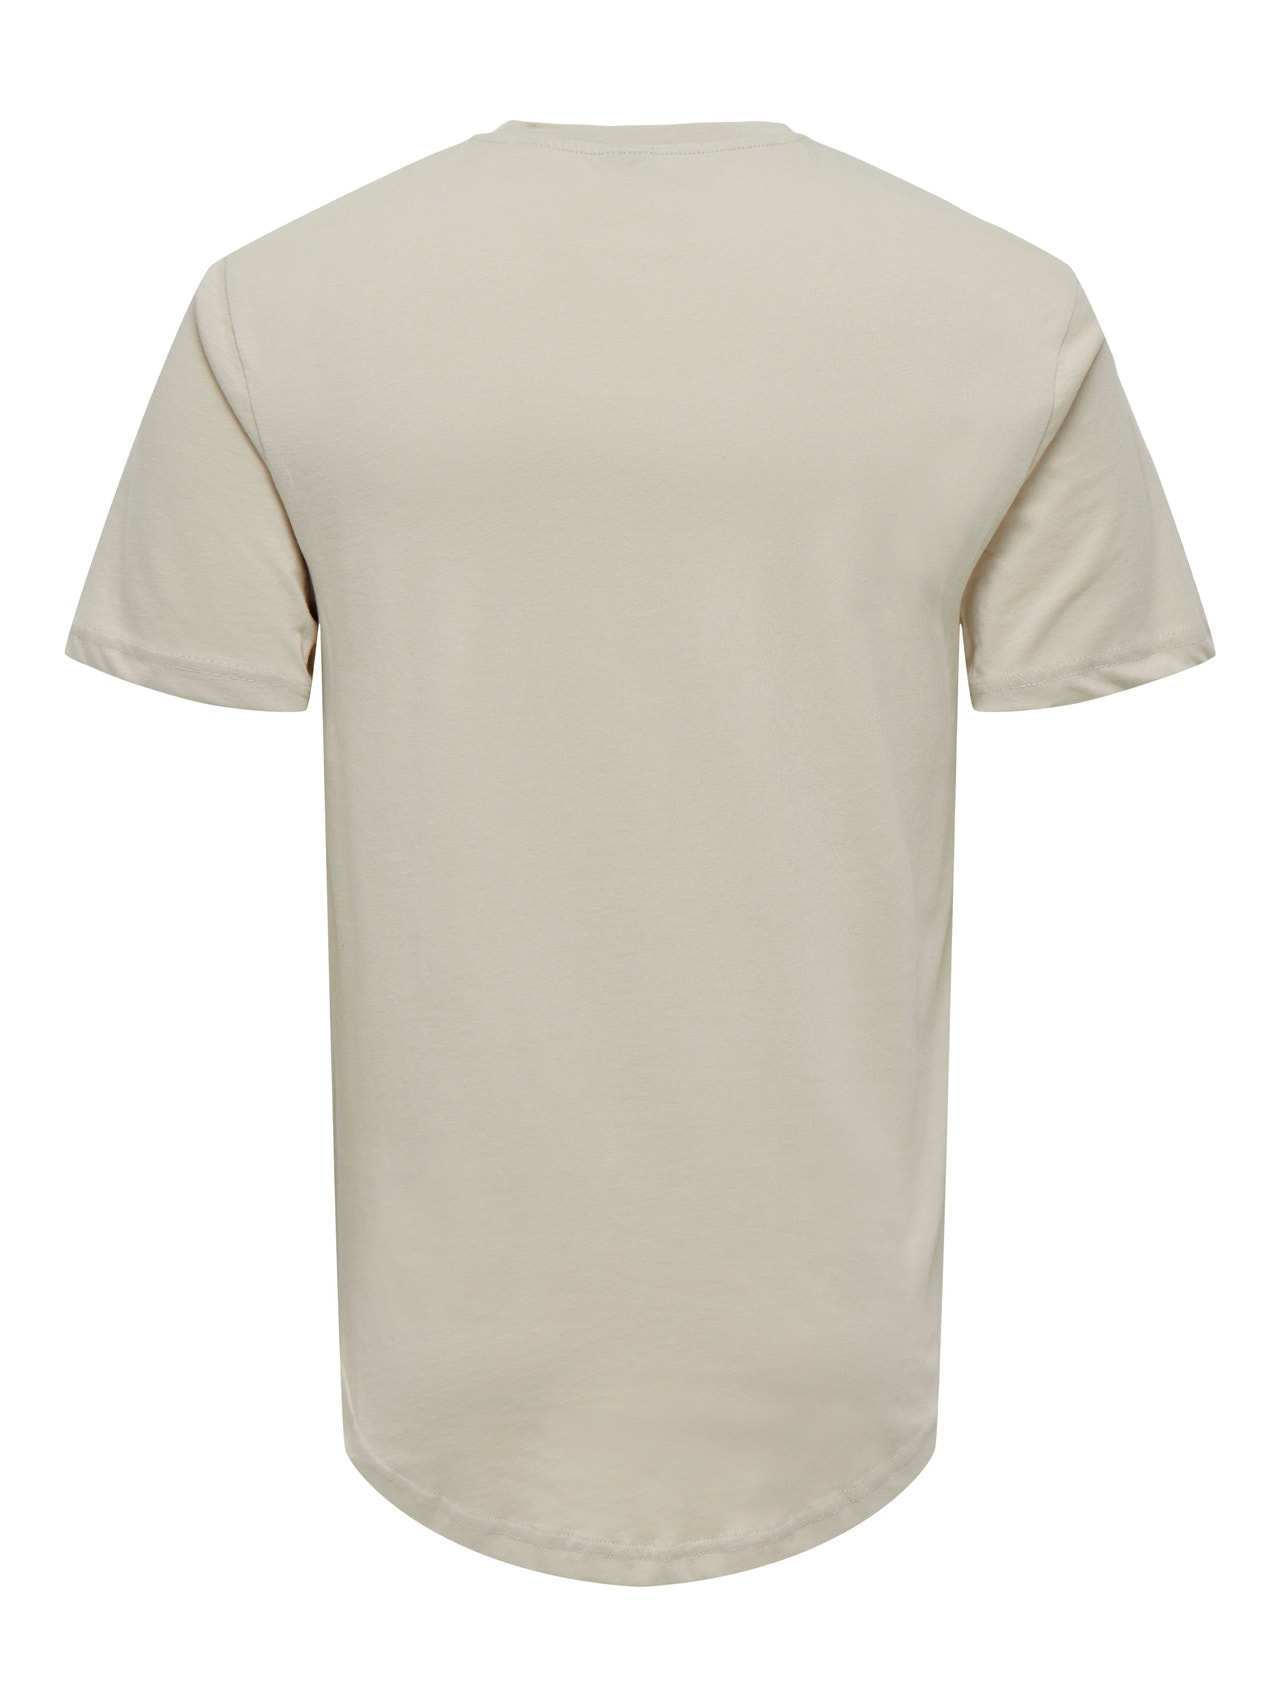 ONLY & SONS Long Line Fit Round Neck T-Shirt -Silver Lining - 22002973